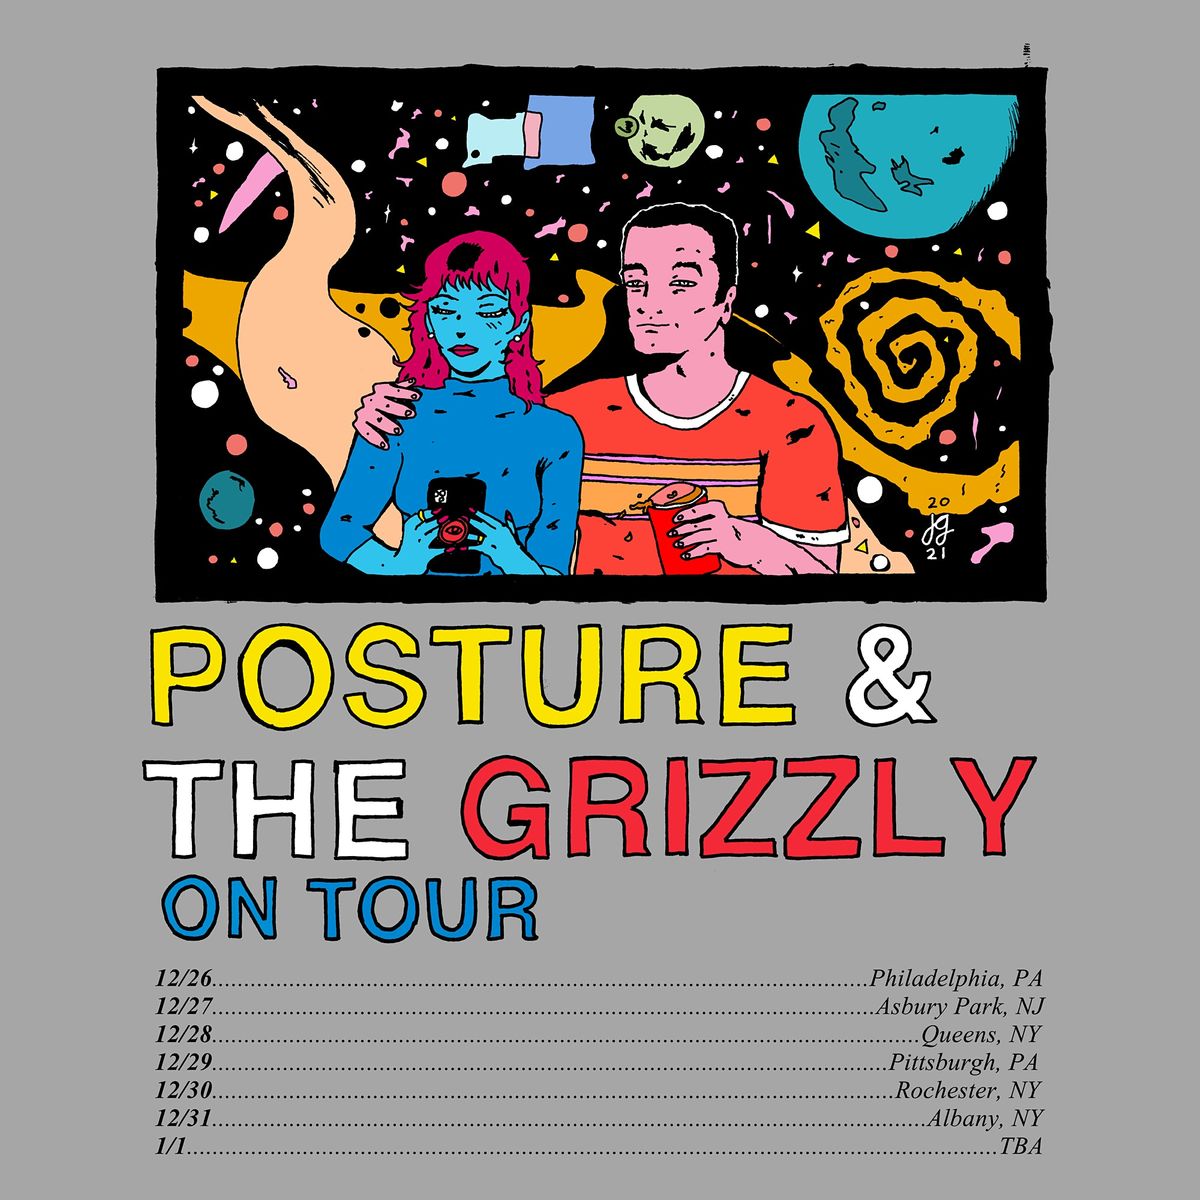 Posture & the Grizzly \/ Harmony Woods